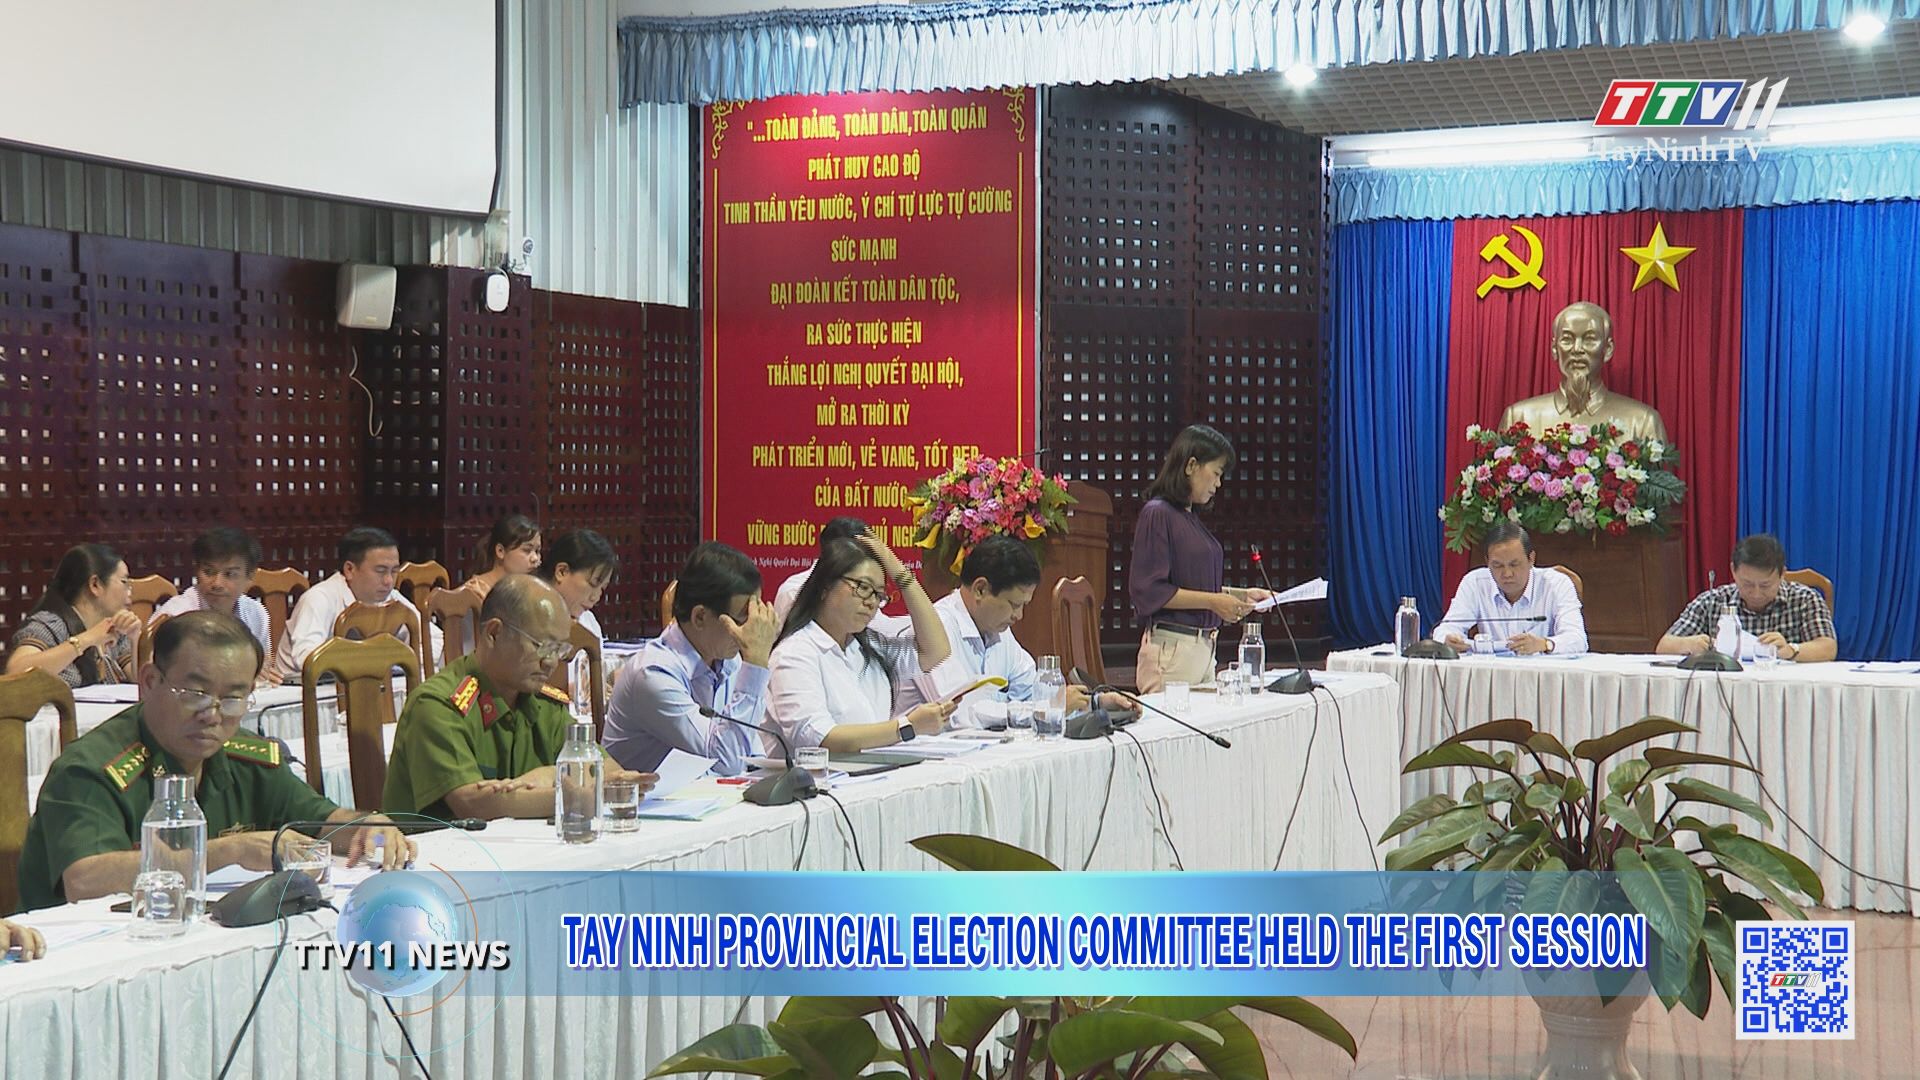 Tay Ninh Provincial Election Committee held the first session | TTVNEWS | TayNinhTV Today